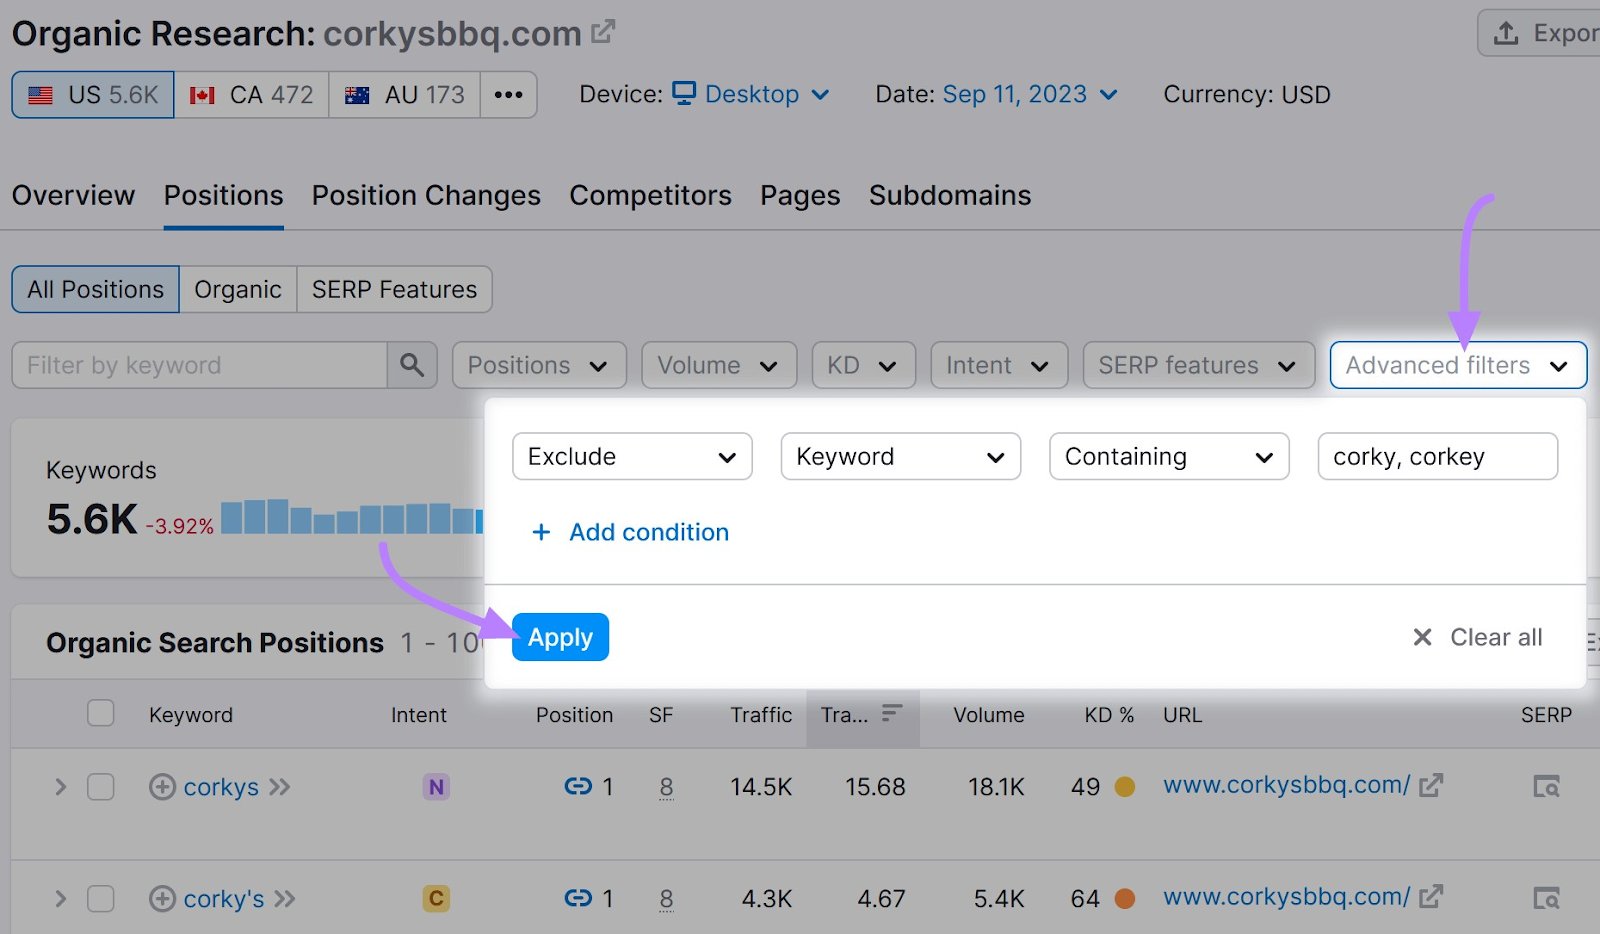 using filter to exclude the keywords containing “corky” and “corkey”